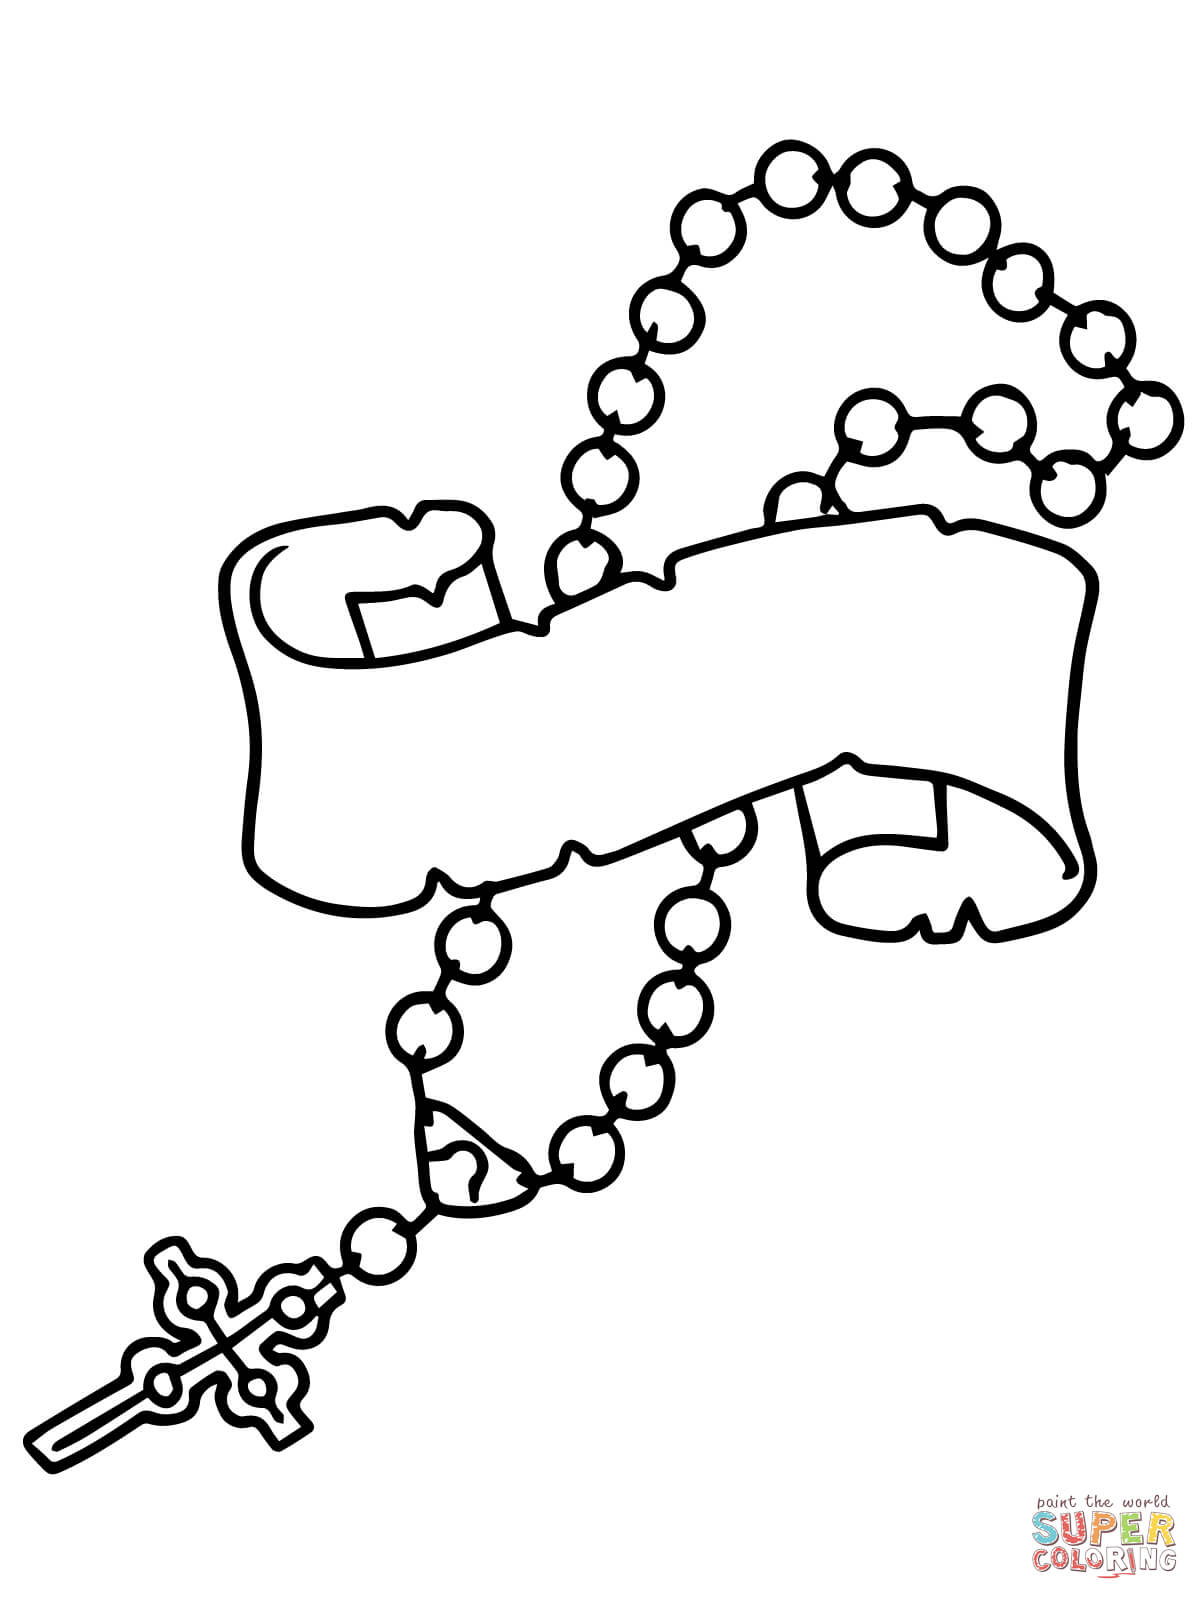 Rosary beads coloring page free printable coloring pages